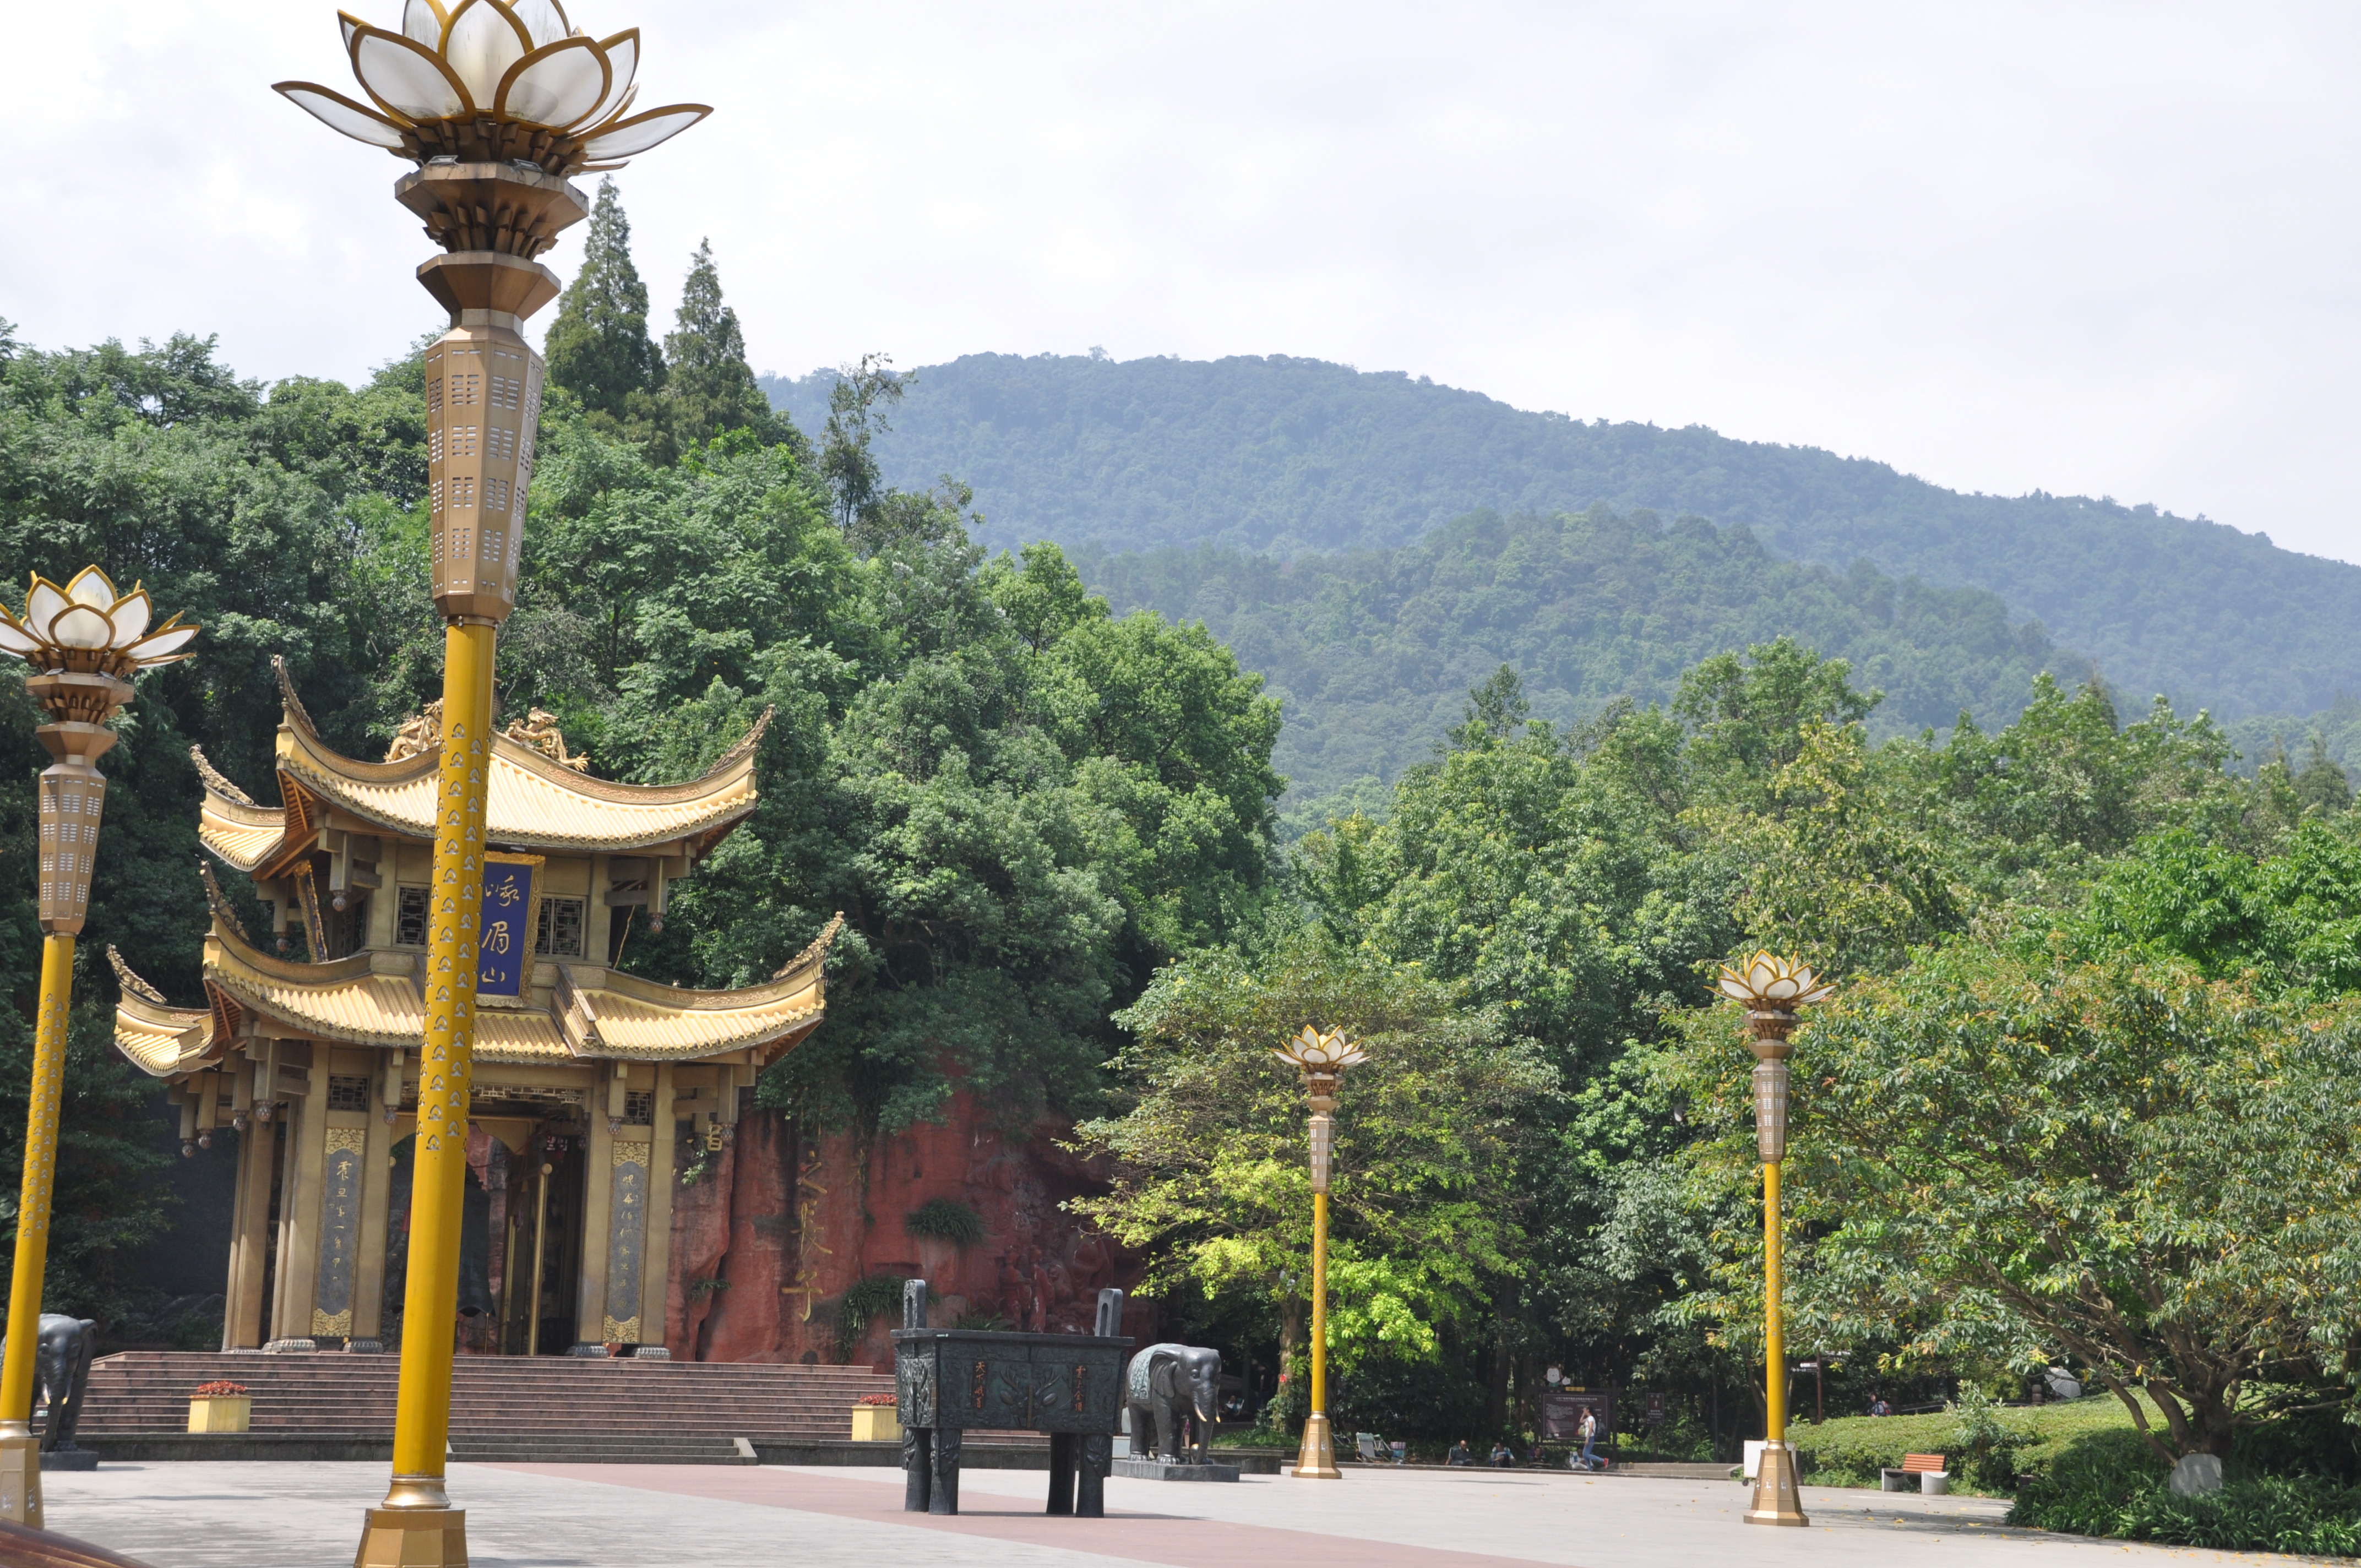 Two Travel The World - Mount Emei